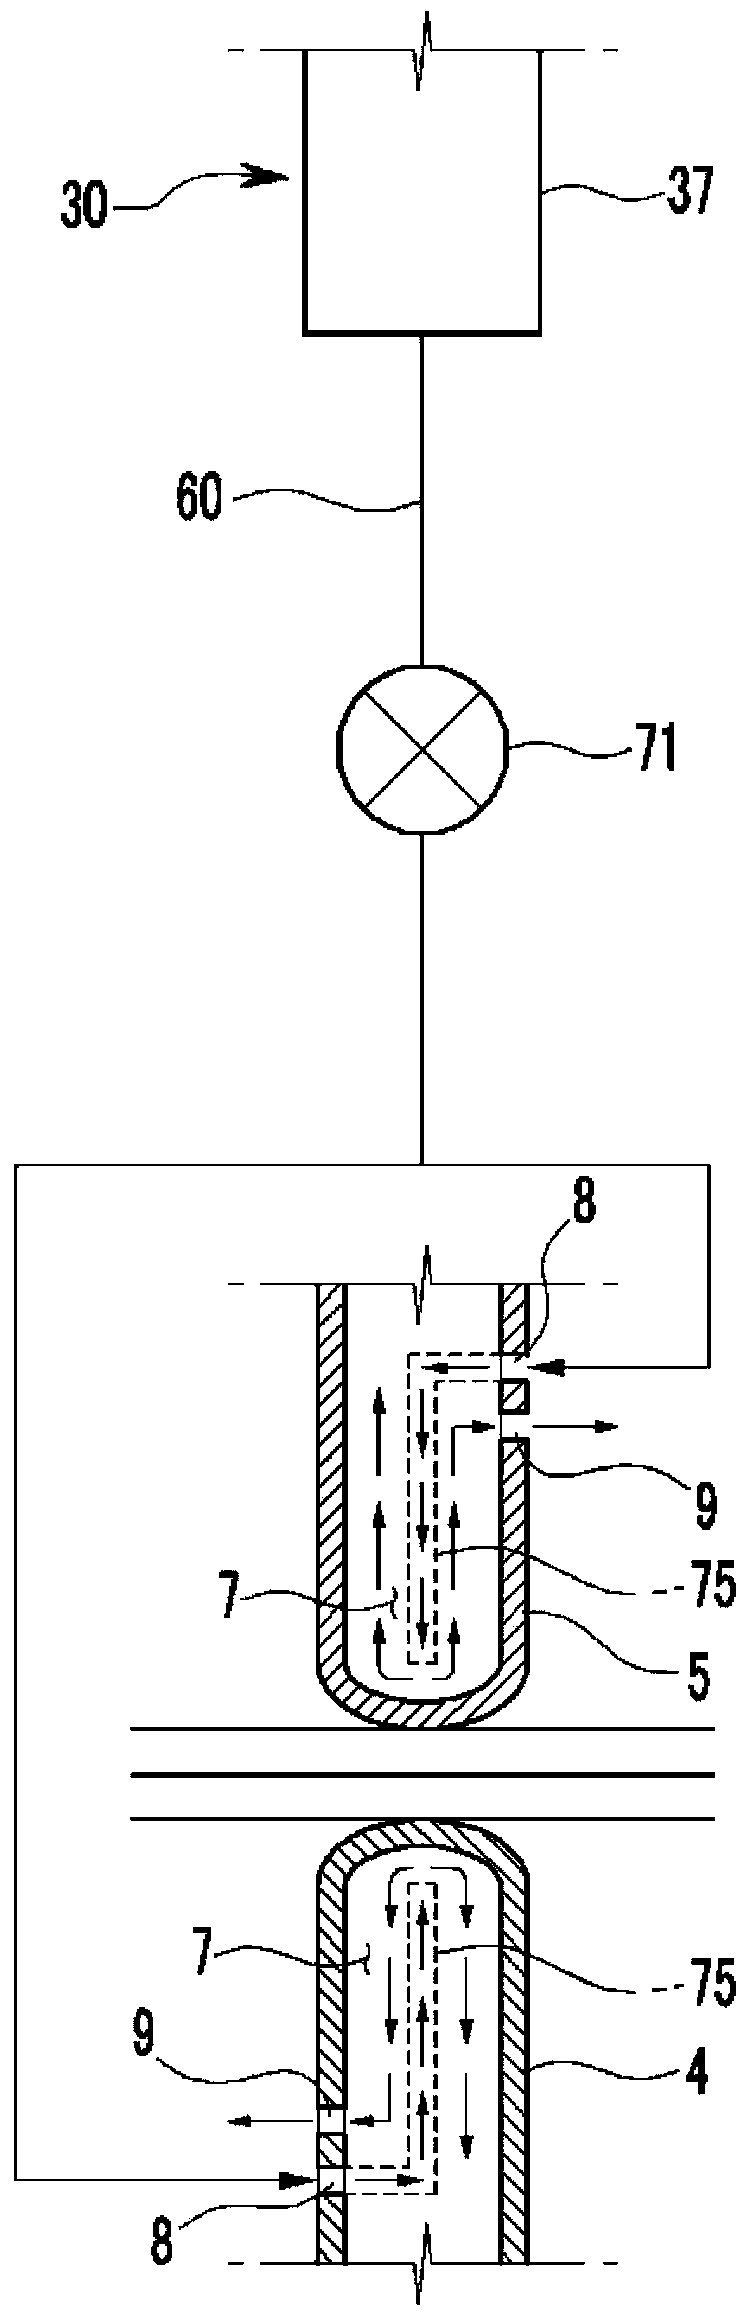 Cooling system for spot welding device